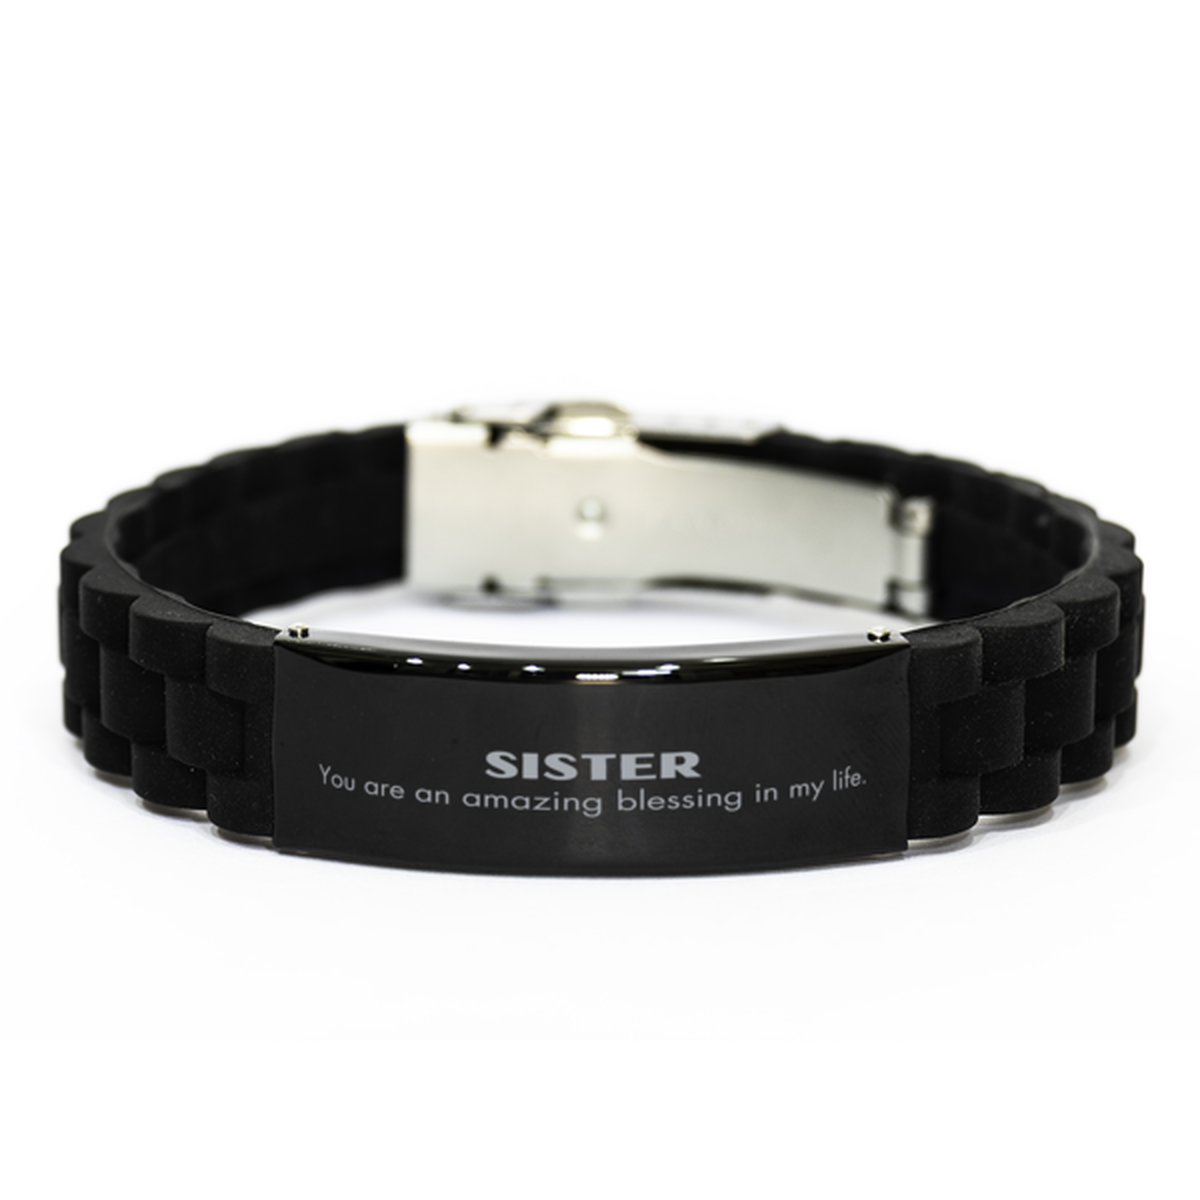 Sister Black Glidelock Clasp Bracelet, You are an amazing blessing in my life, Thank You Gifts For Sister, Inspirational Birthday Christmas Unique Gifts For Sister